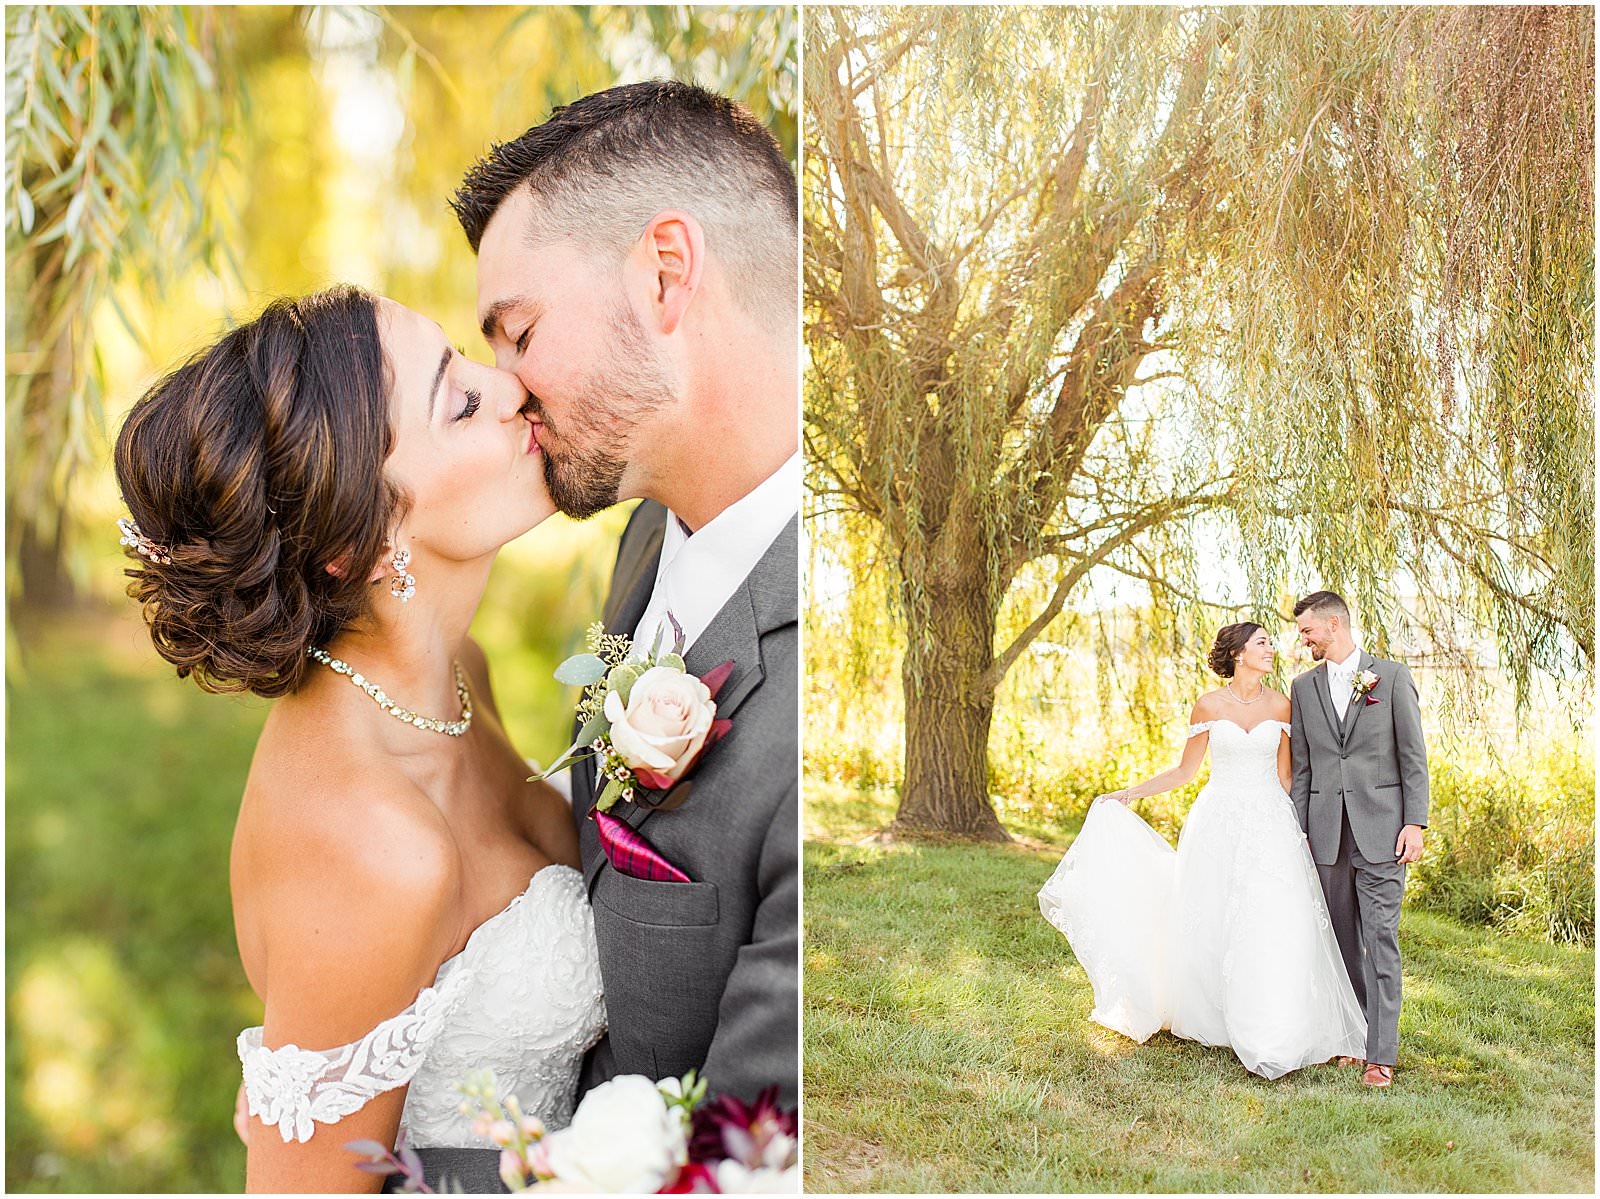 A Stunning Fall Wedding in Indianapolis, IN |. Sally and Andrew | Bret and Brandie Photography 0067.jpg